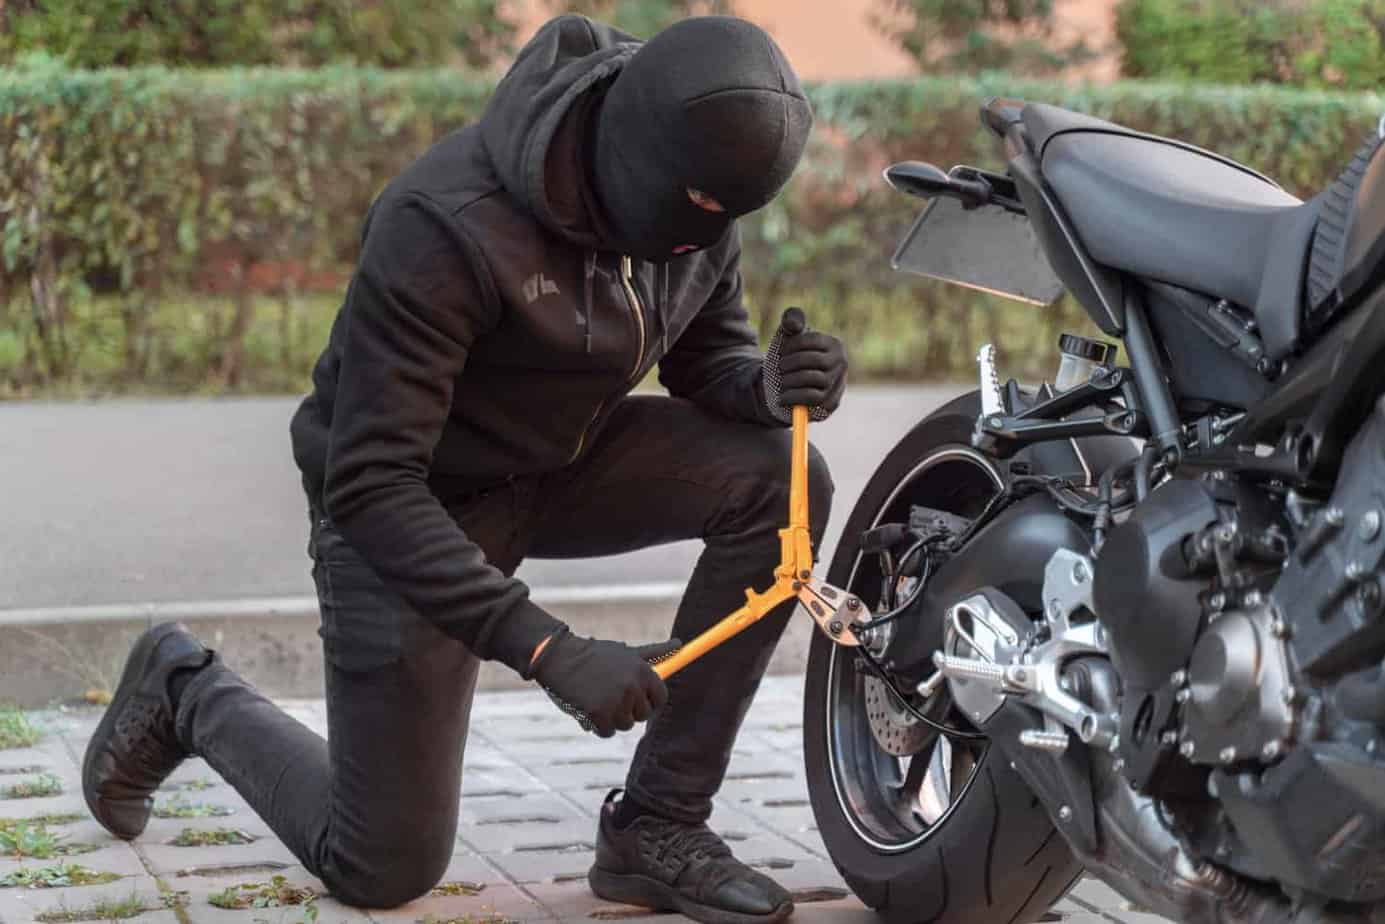 Role of Technology in Combating Motorcycle Theft